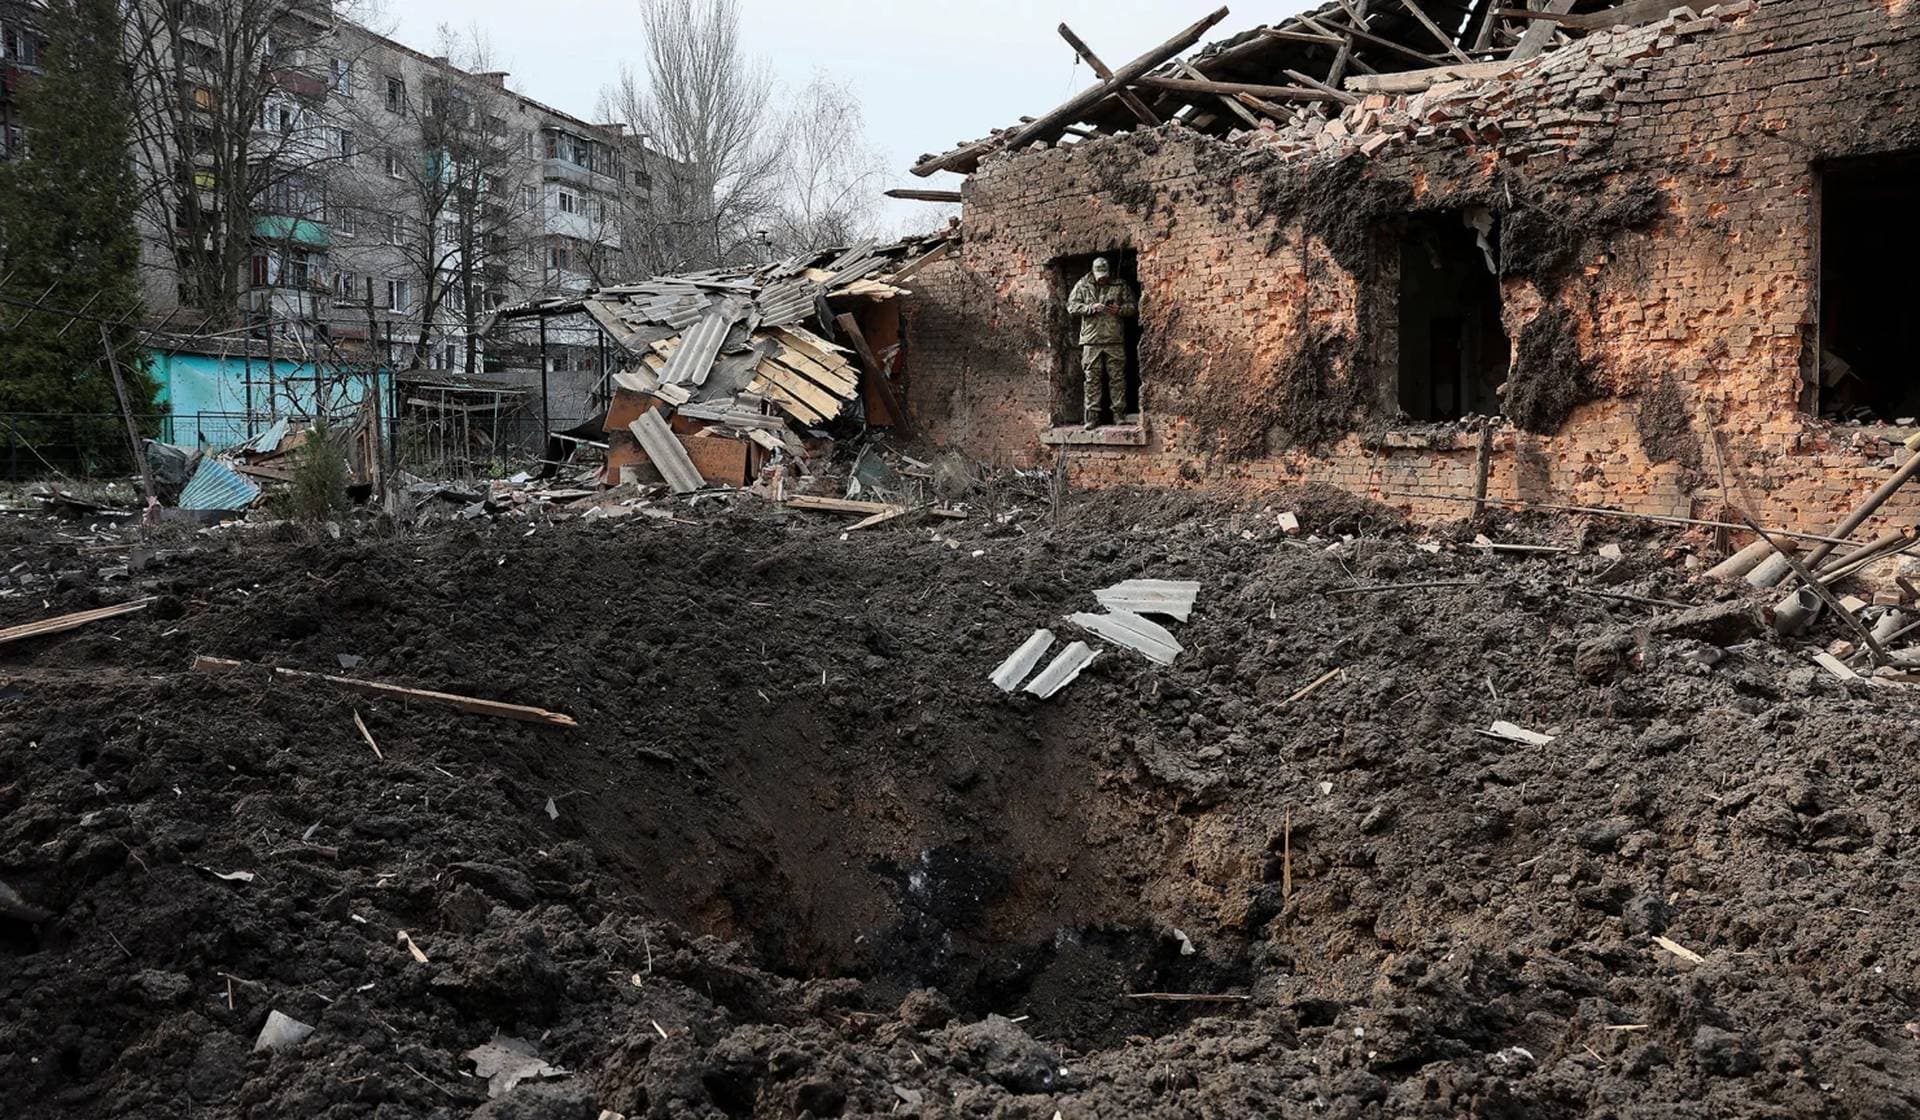 A Ukrainian serviceman uses his phone near a crater in the aftermath of deadly shelling of residential buildings in Kostiantynivka